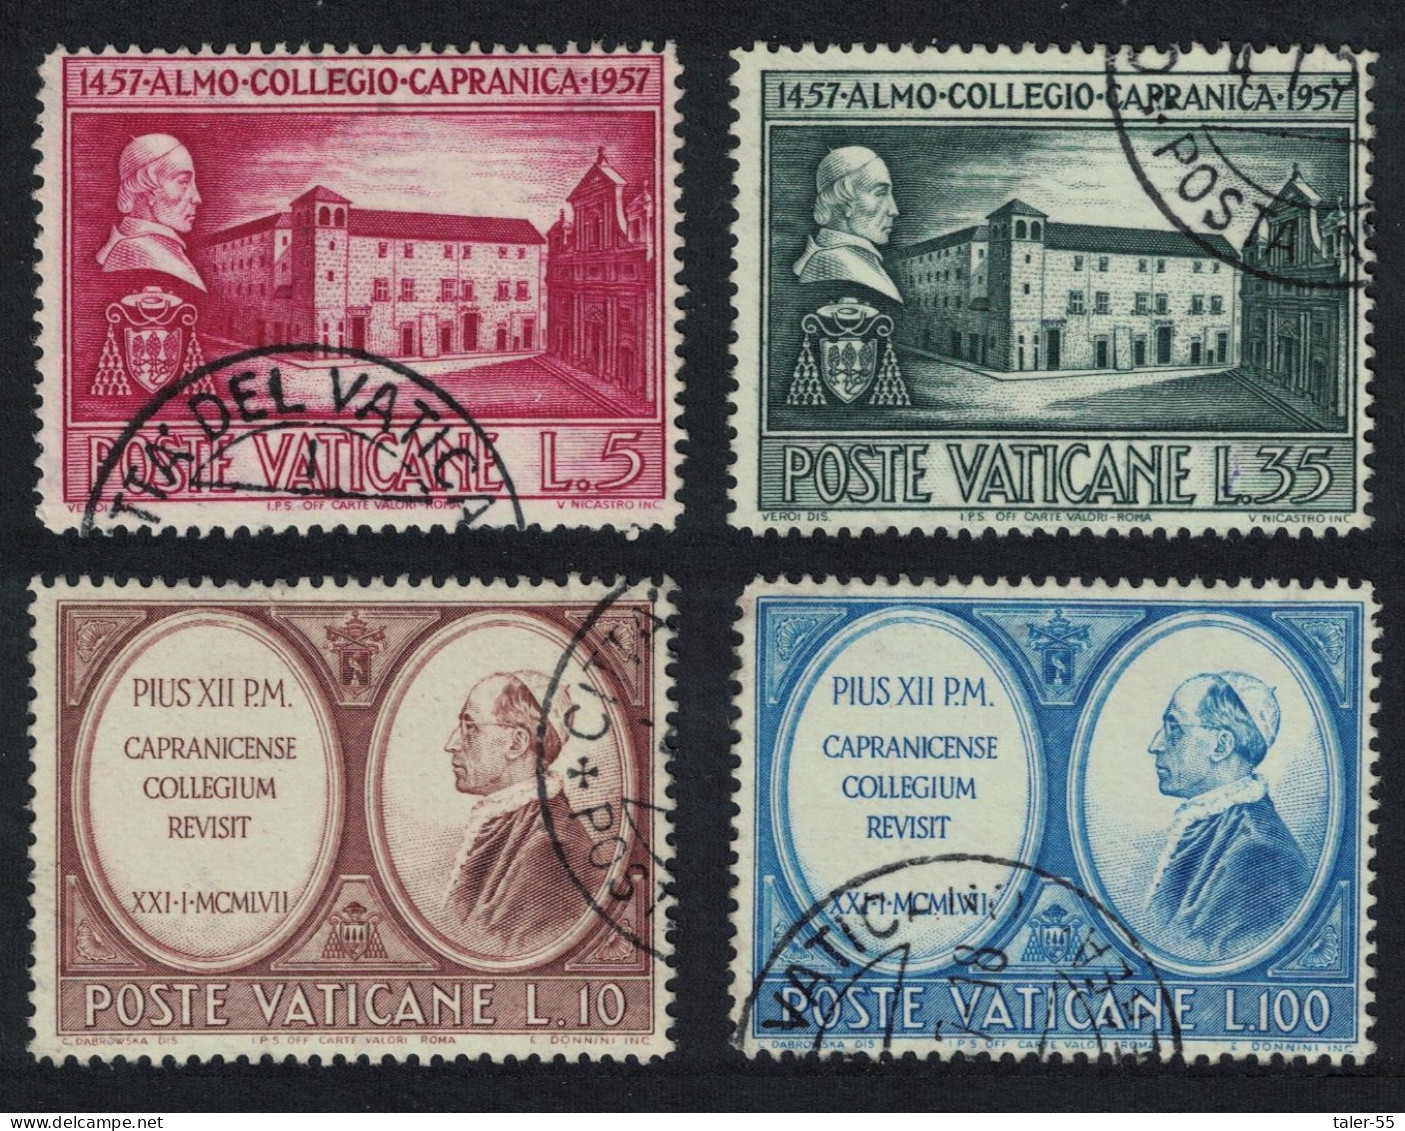 Vatican Fifth Centenary Of Capranica College 4v 1957 Canc SG#255-258 Sc#223-226 - Used Stamps